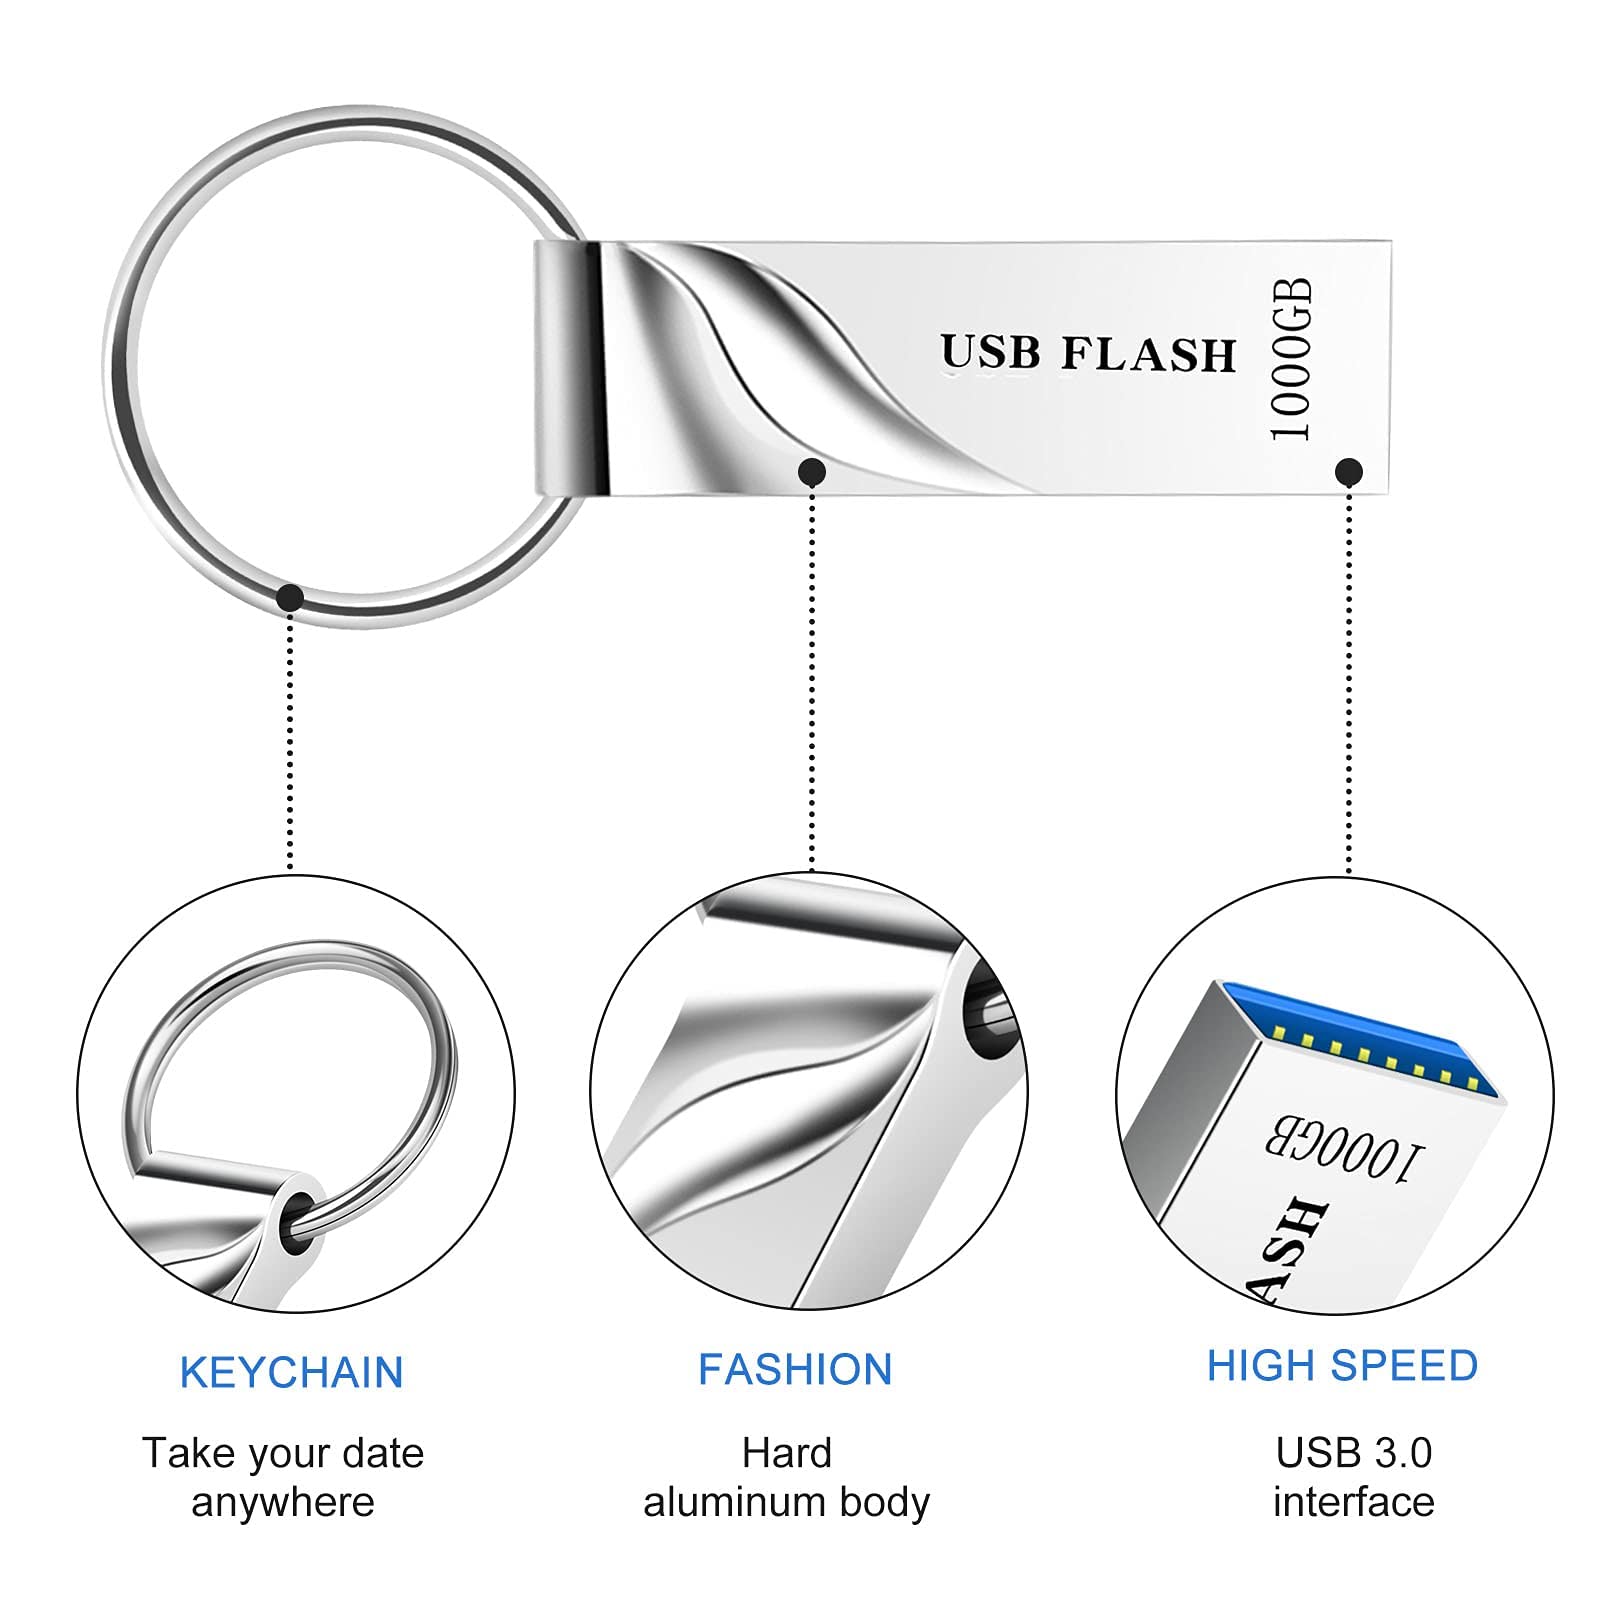 wedcook USB Flash Drive 1TB Waterproof USB 3.0 Flash Drive Portable Thumb Drive High Speed Memory Stick 1000GB with Keychain Design for Extenal Data Storage and Backup